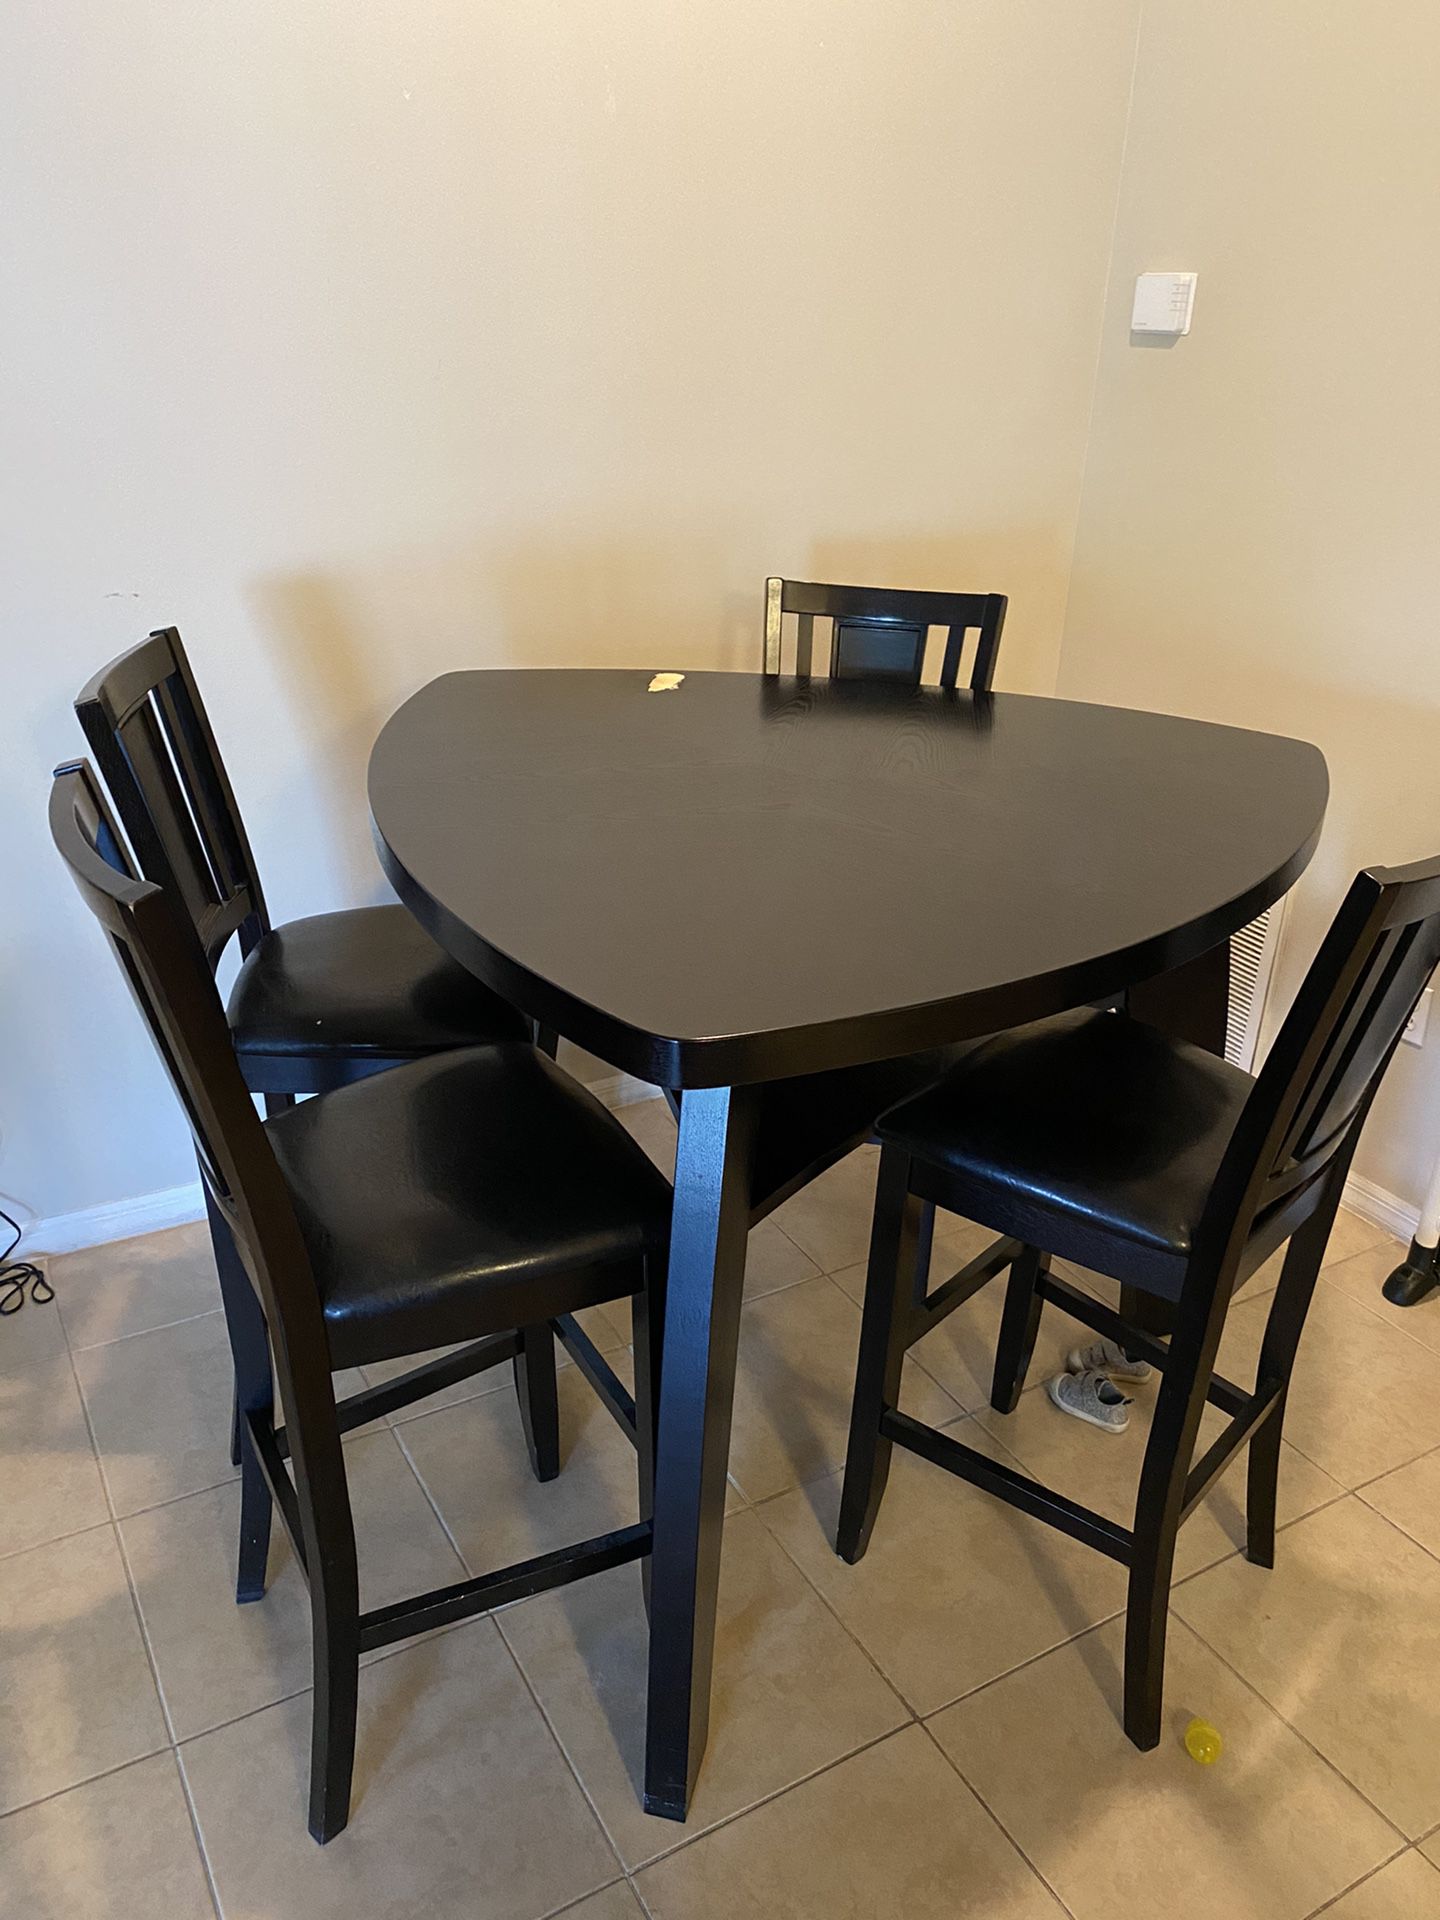 Dining room table set w/ 4 chairs